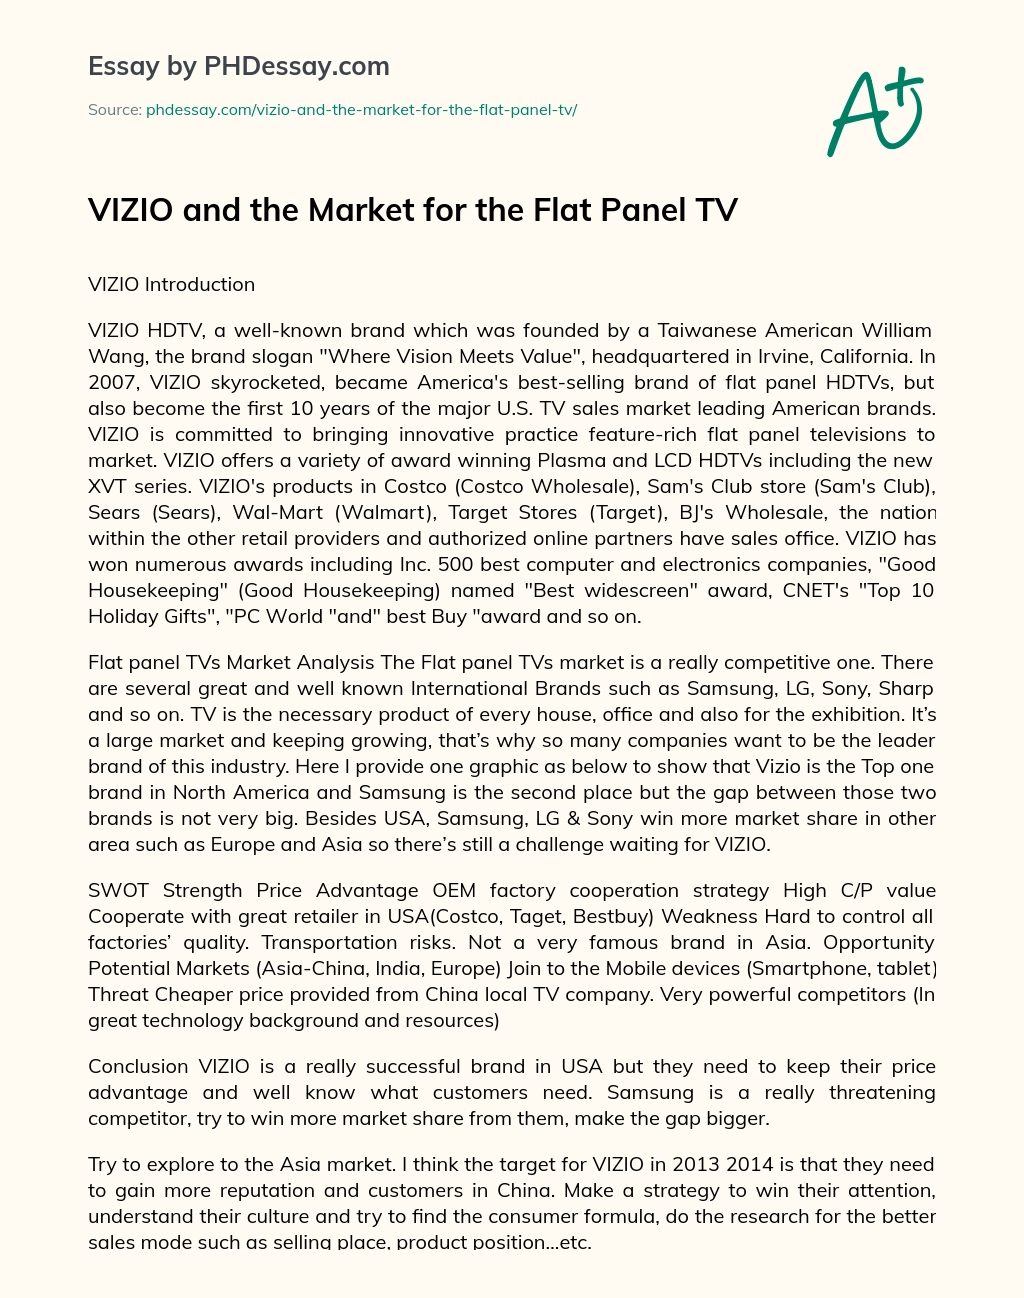 VIZIO and the Market for the Flat Panel TV essay